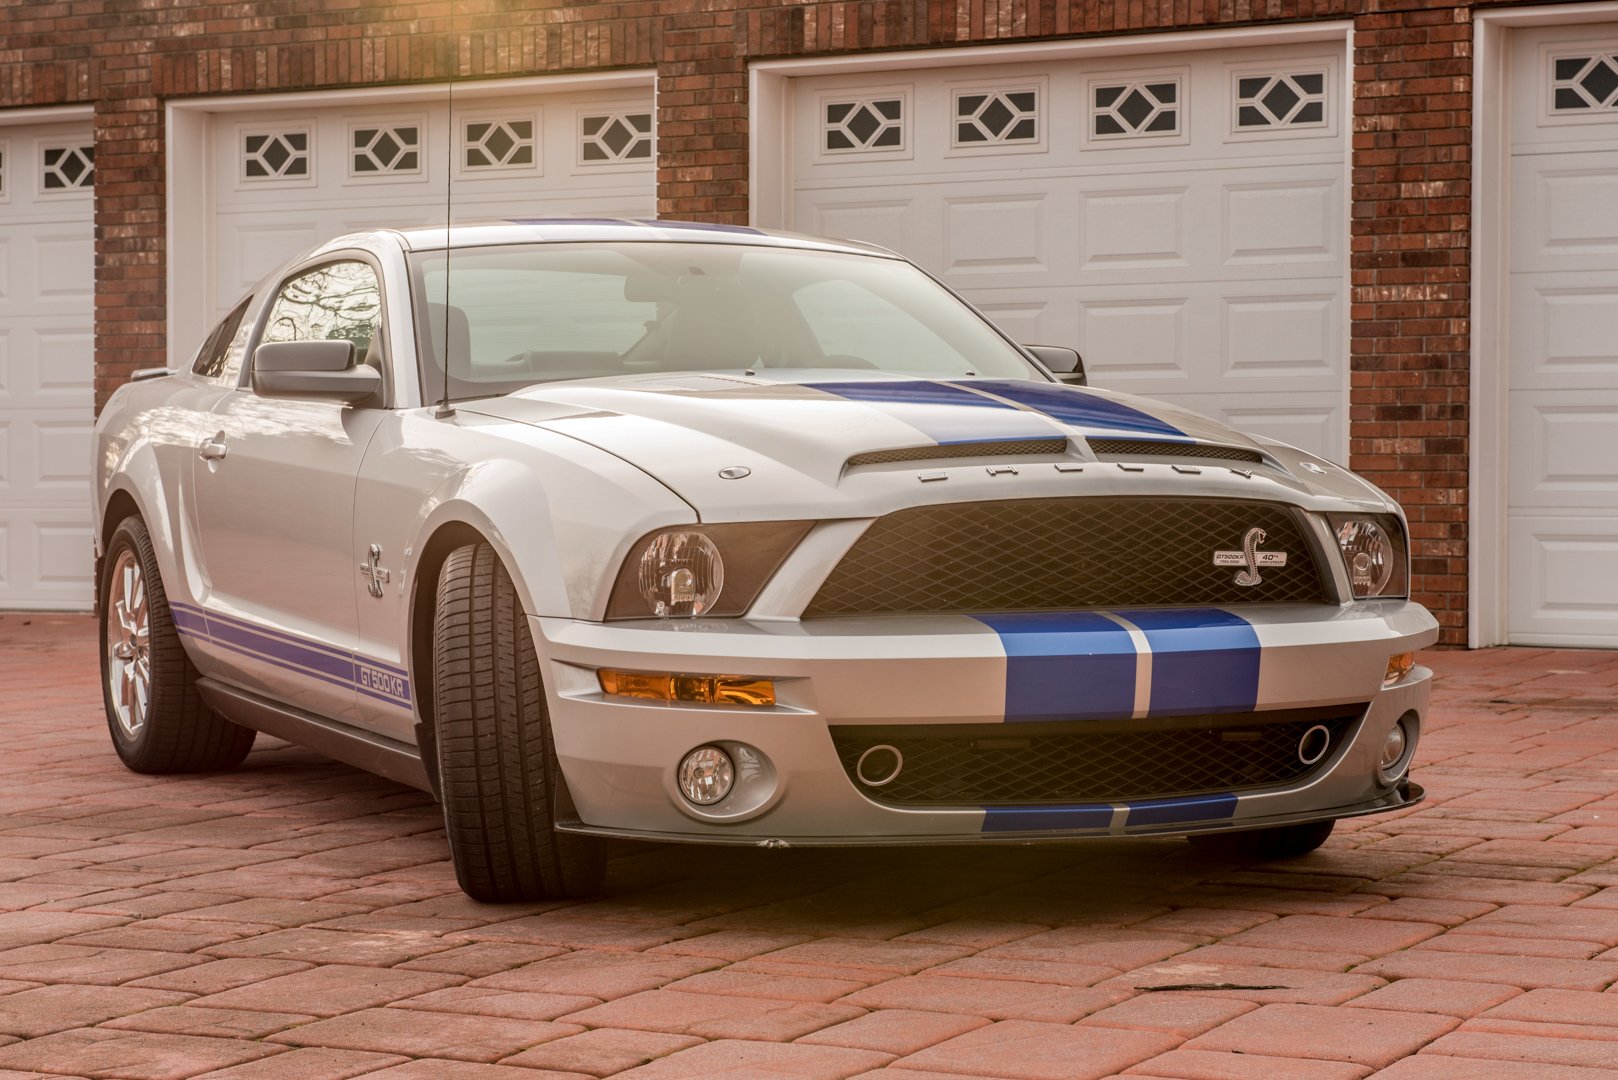 2008 Ford Shelby Mustang GT500KR Vehicles Ford Shelby Mustang GT500KR Ford ...